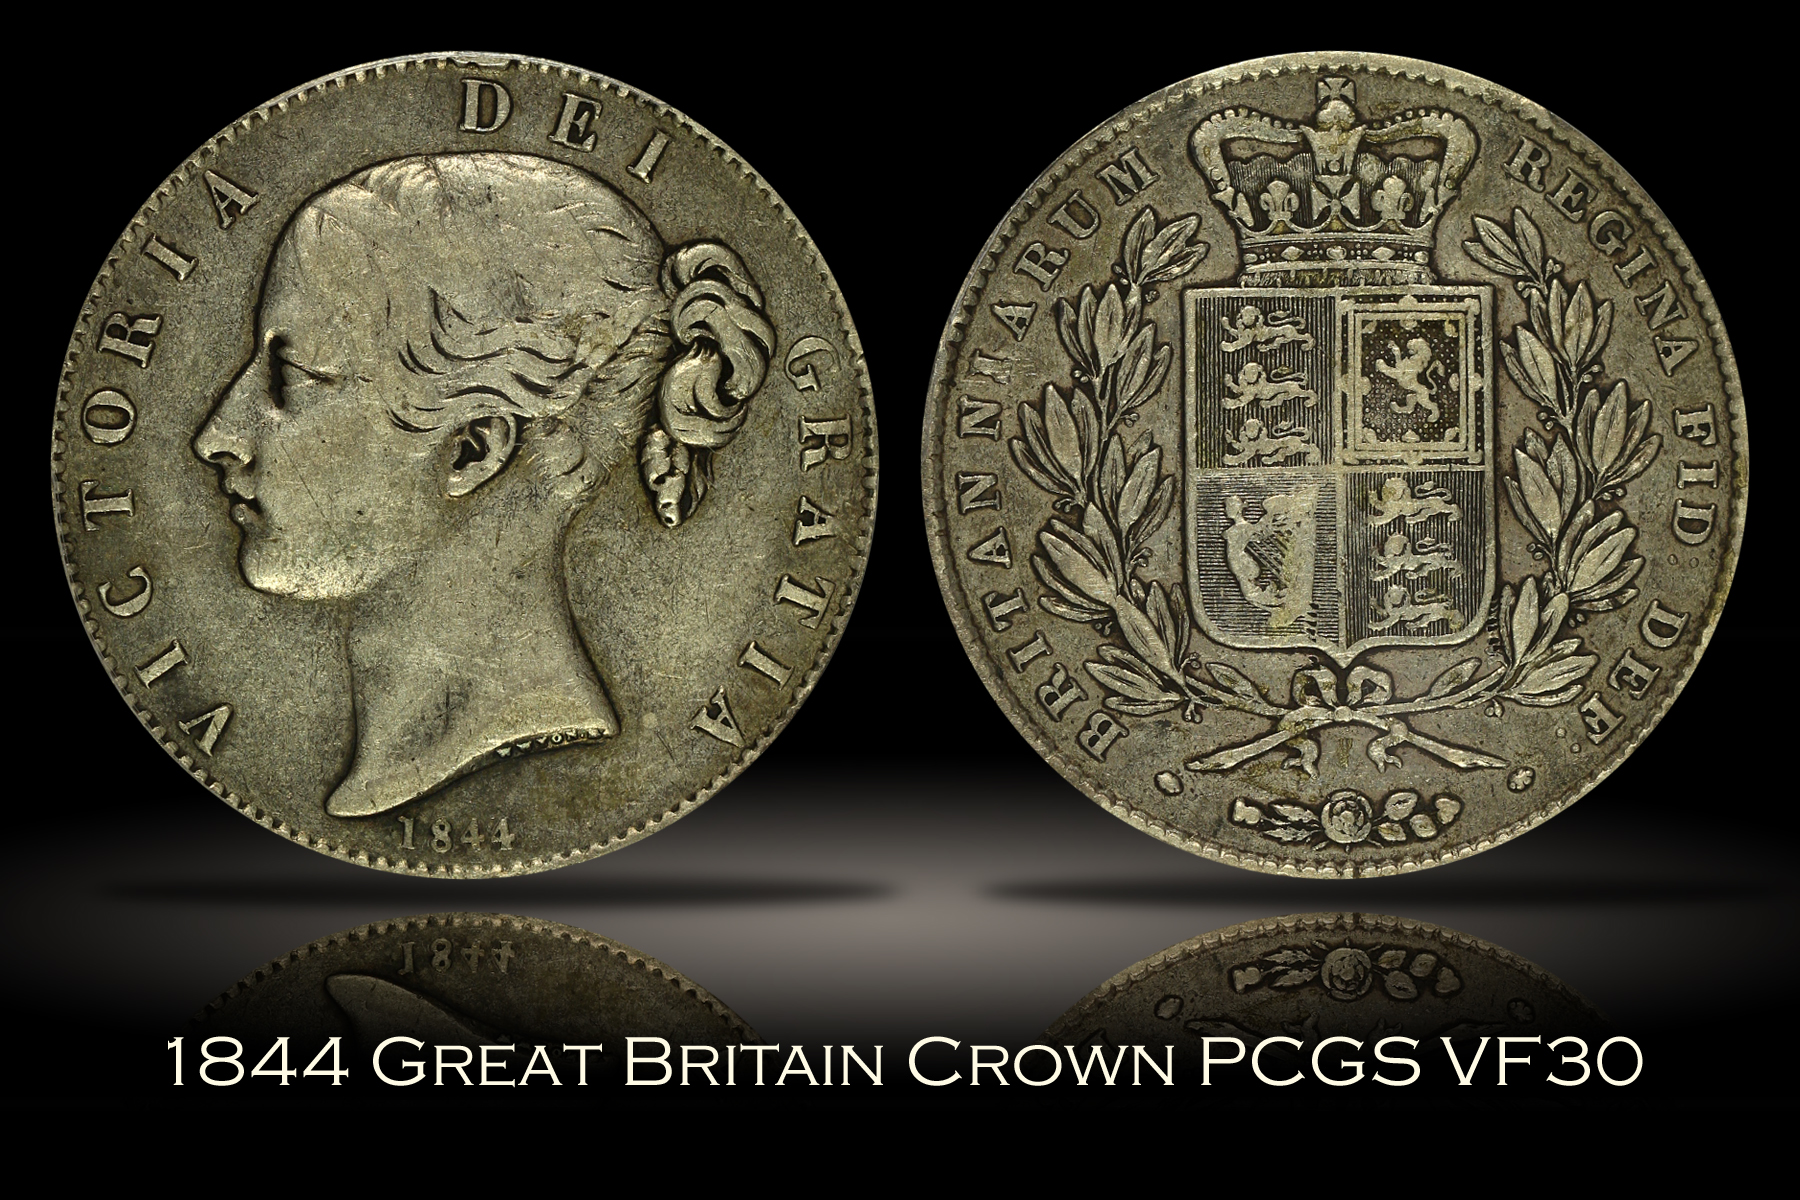 1844 Great Britain Crown PCGS VF30